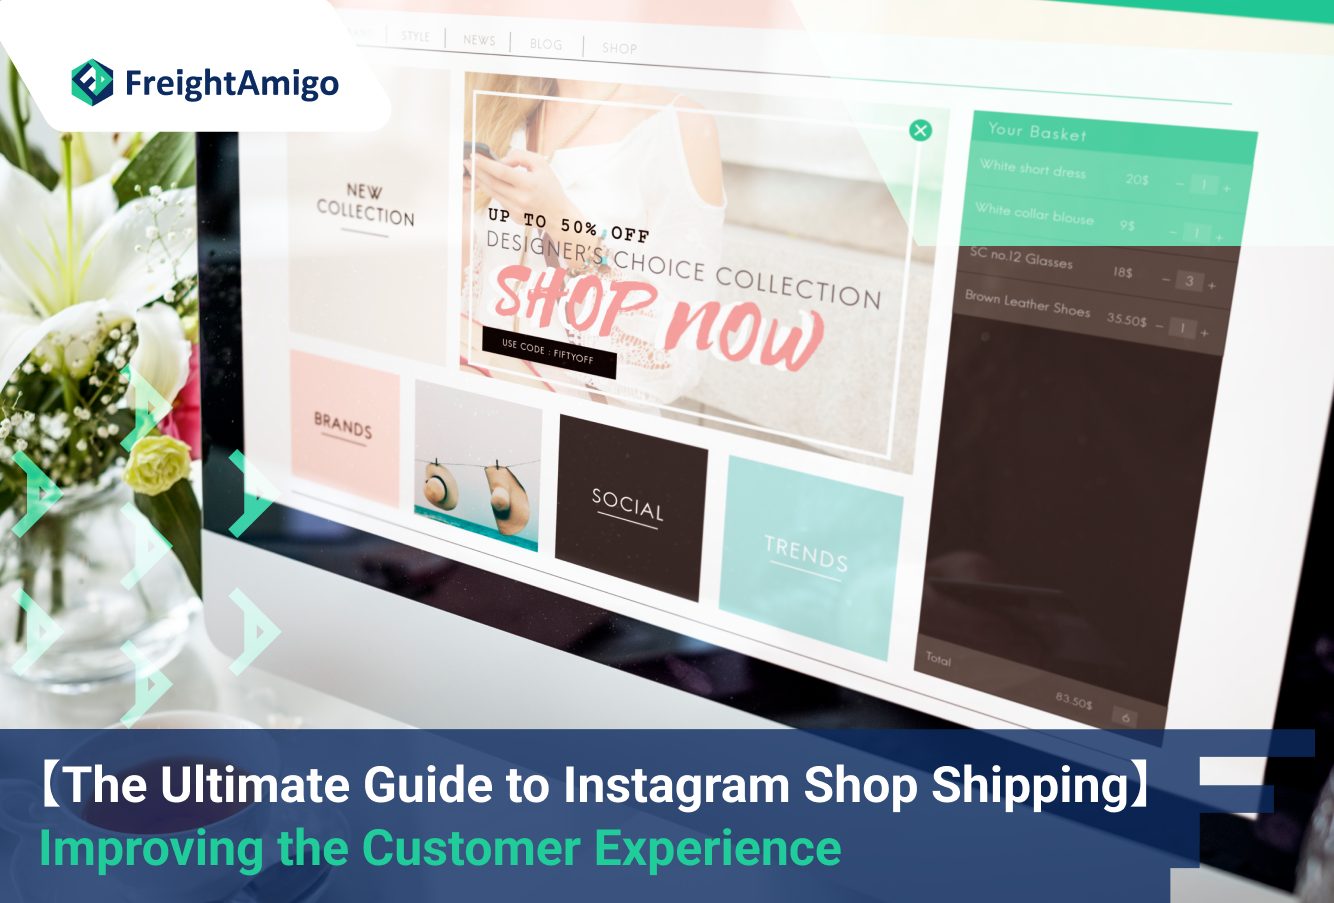 The Ultimate Guide to Instagram Shop Shipping: Improving the Customer Experience